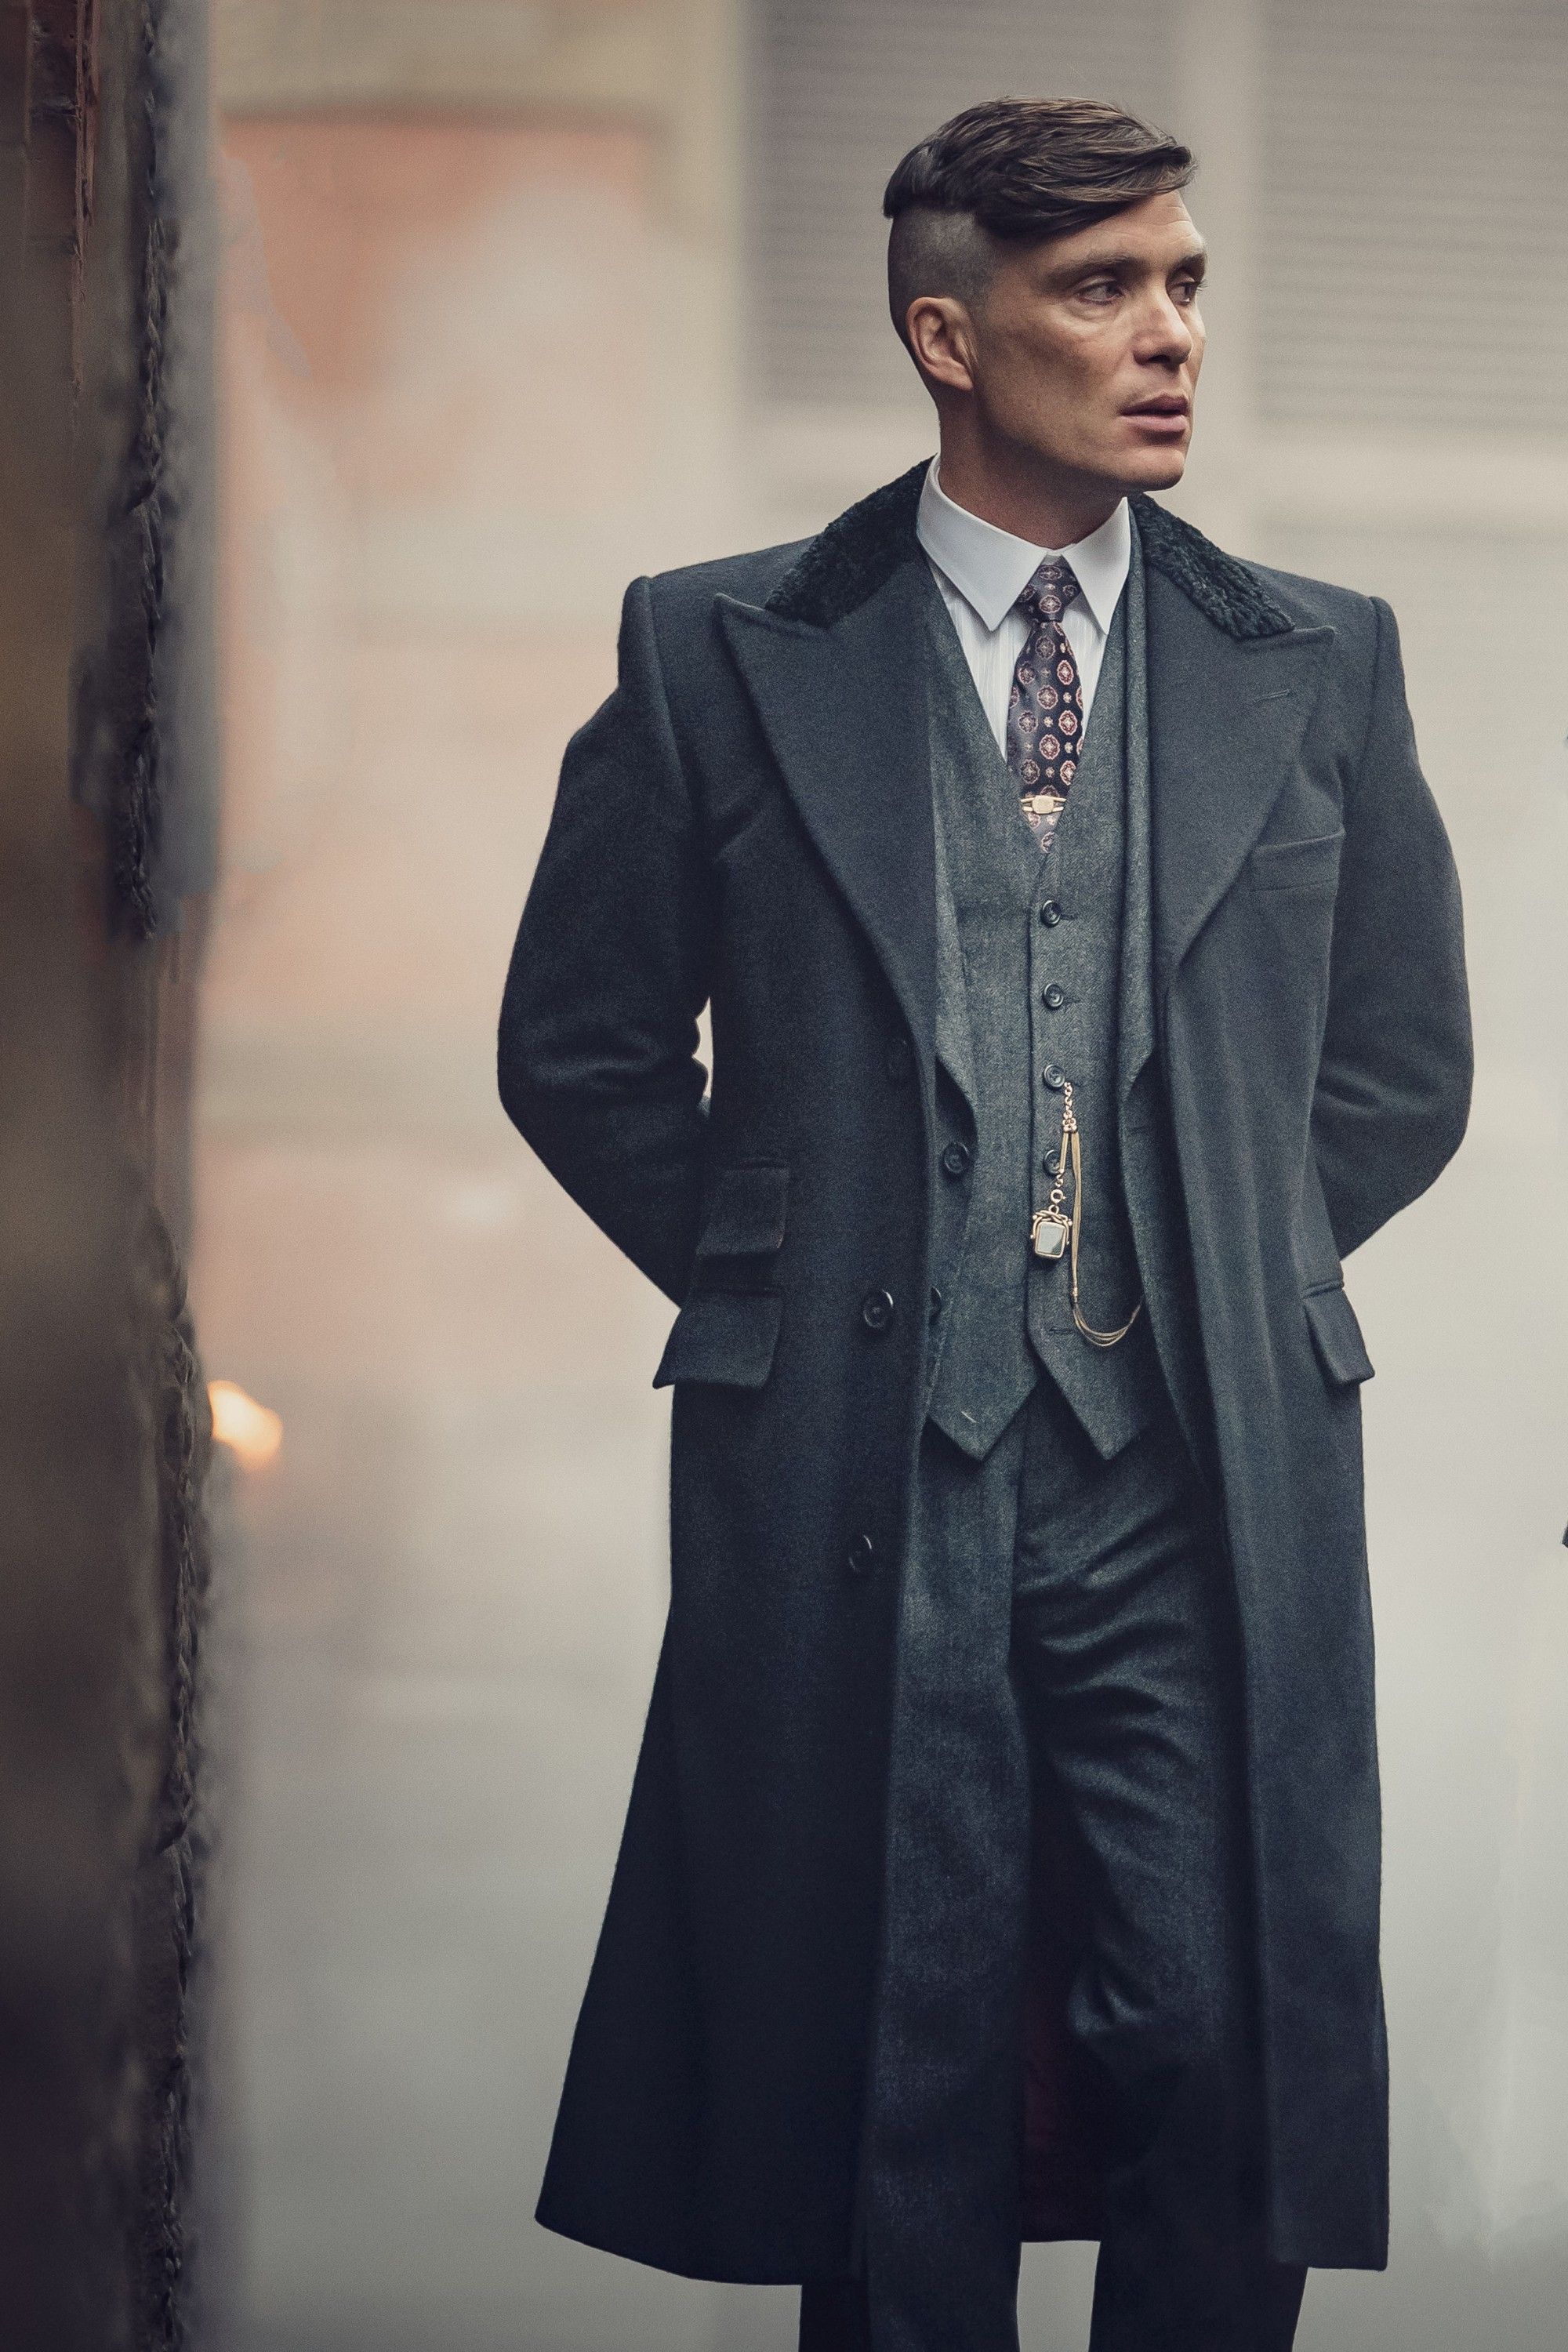 The Amazing Cillian Murphy: In Order of the Peaky Blinders